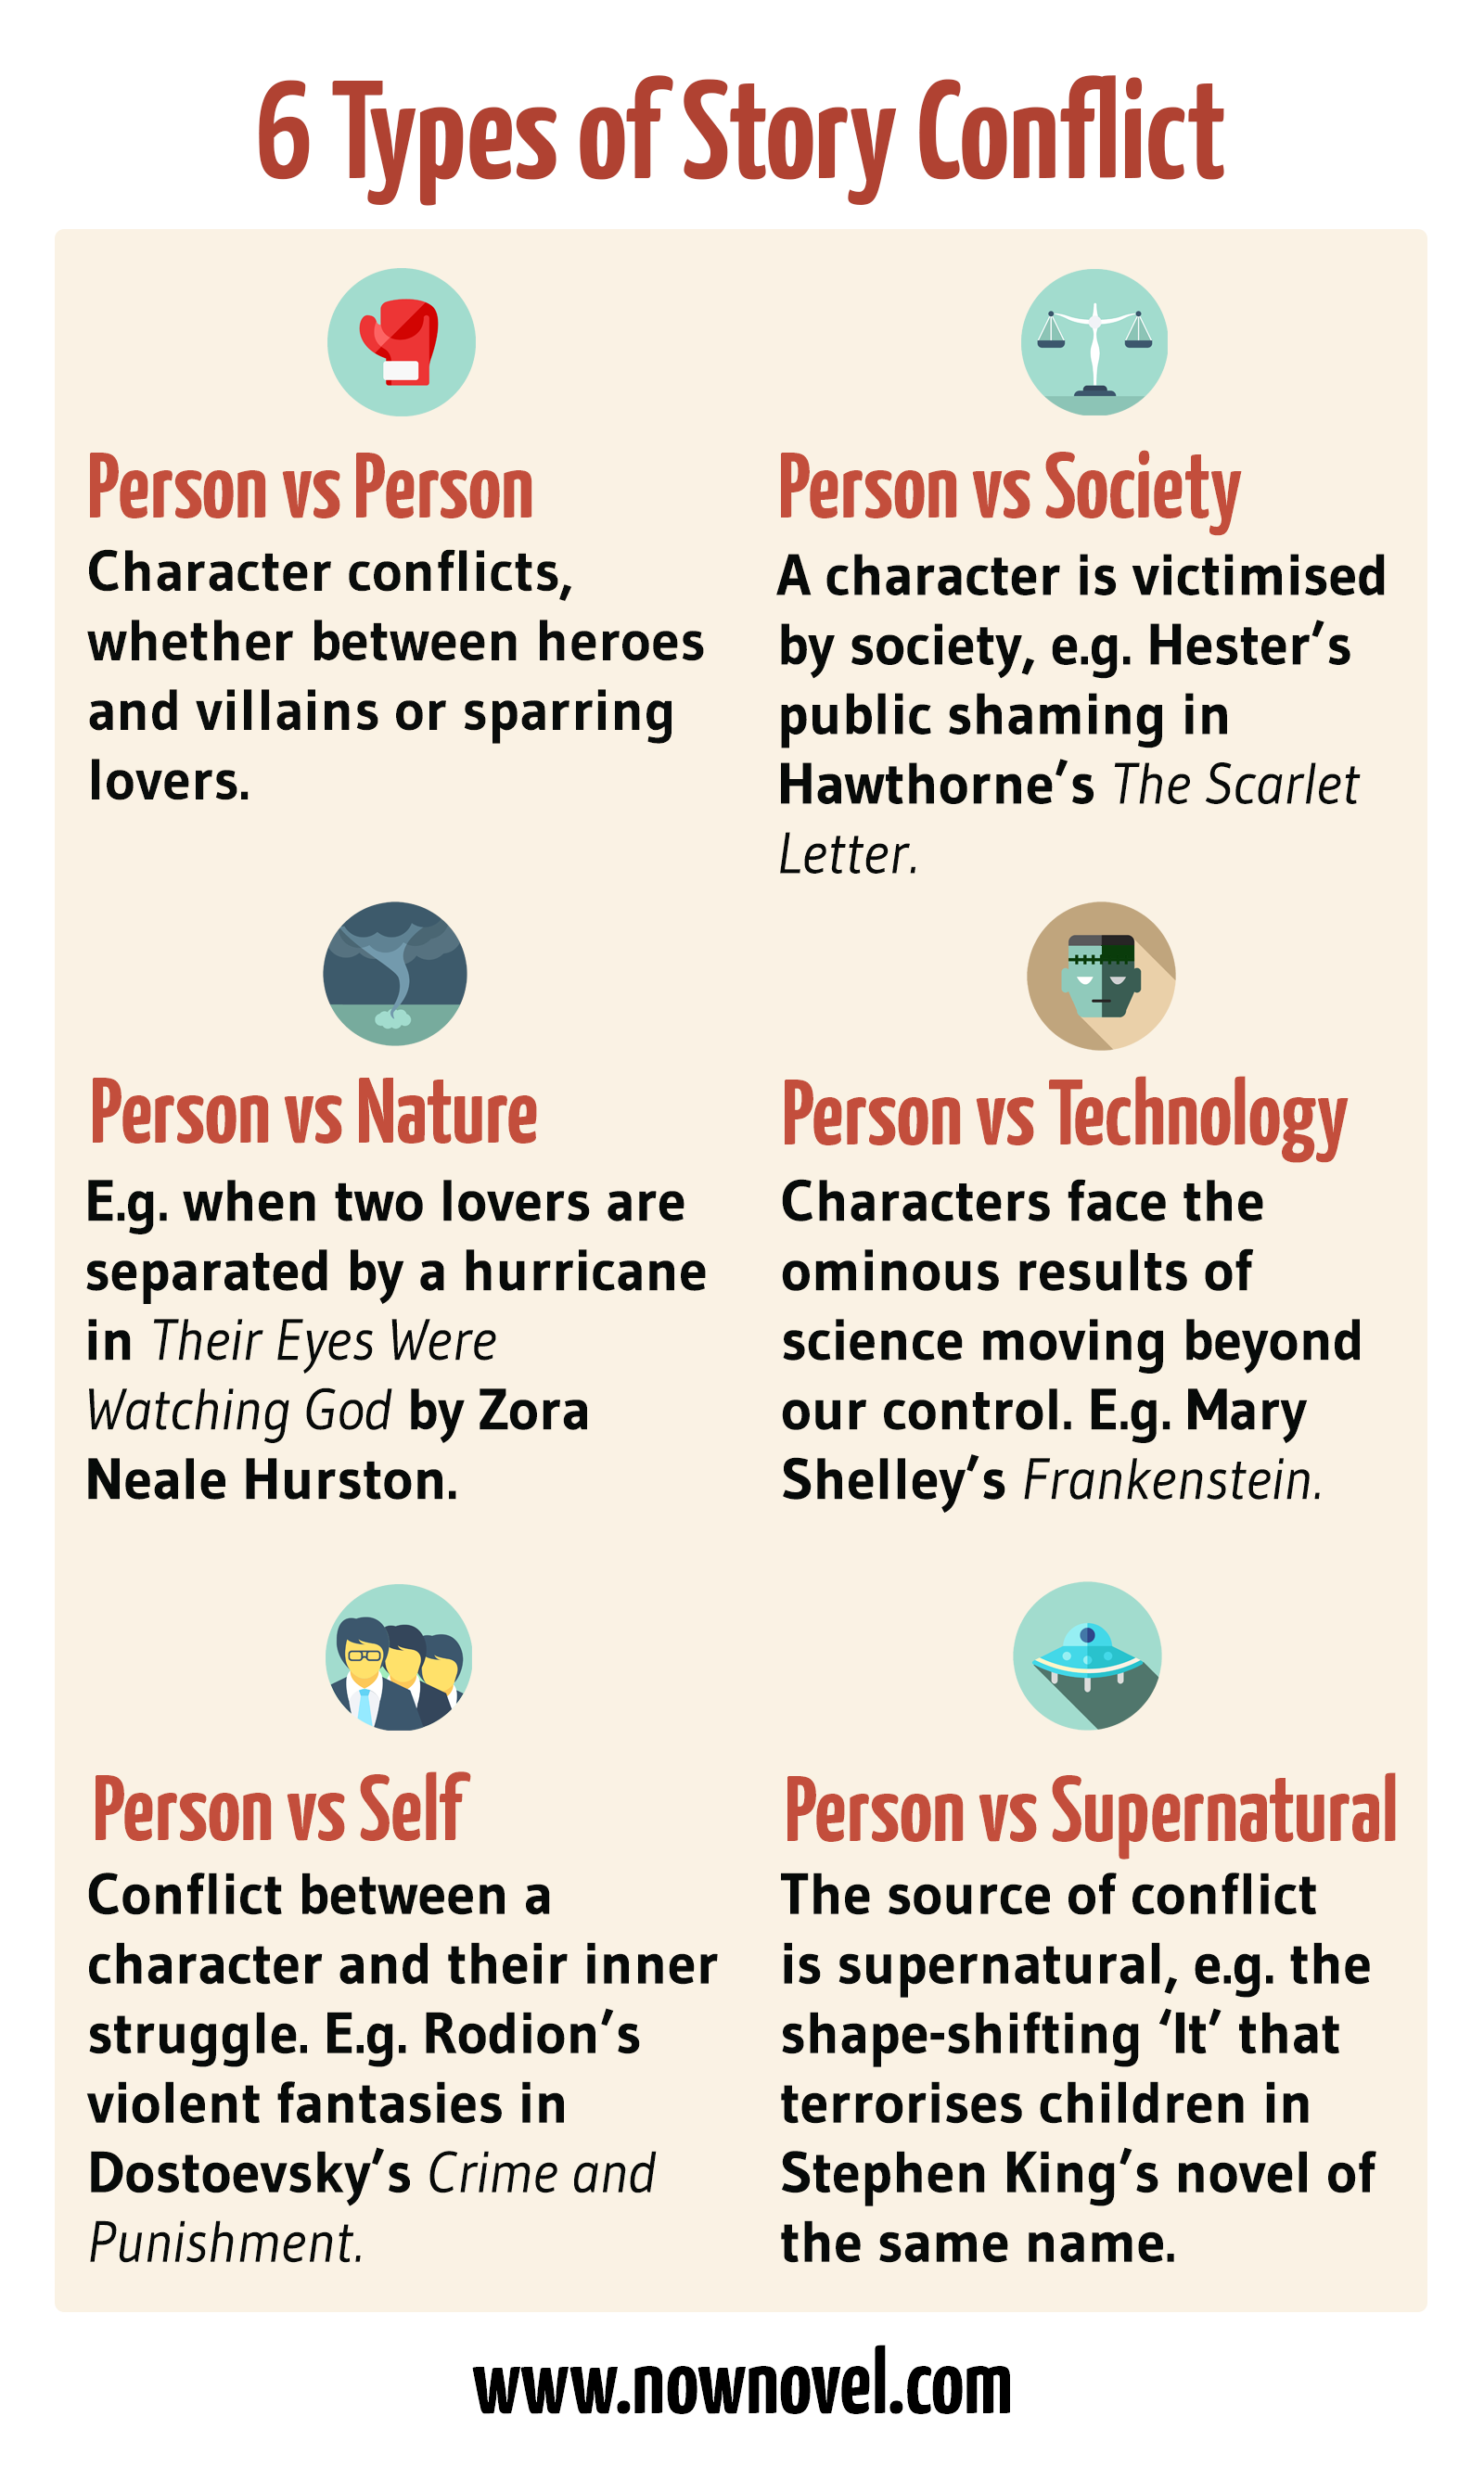 6 Types of Story Conflict